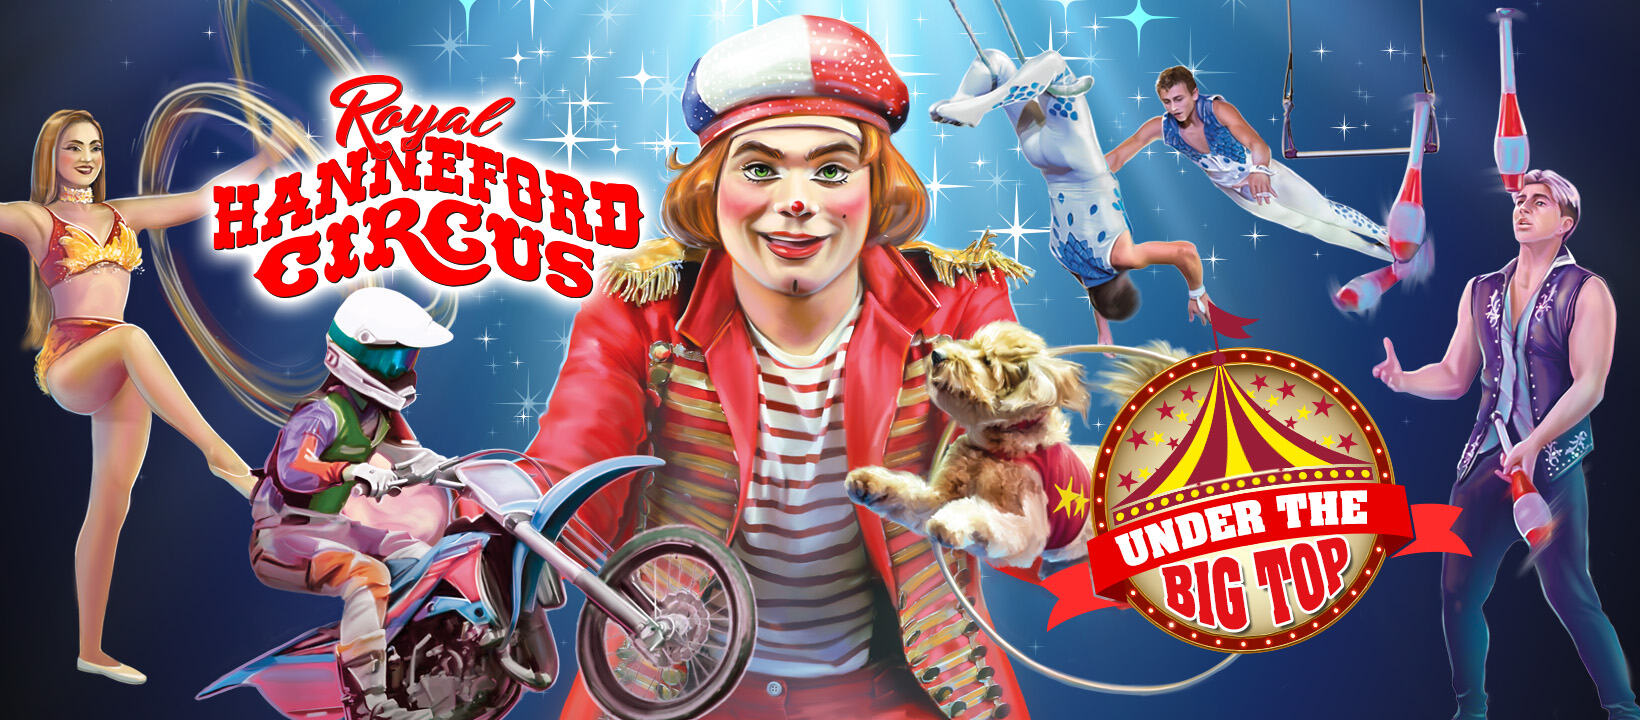 11-facts-you-must-know-about-the-royal-hanneford-circus